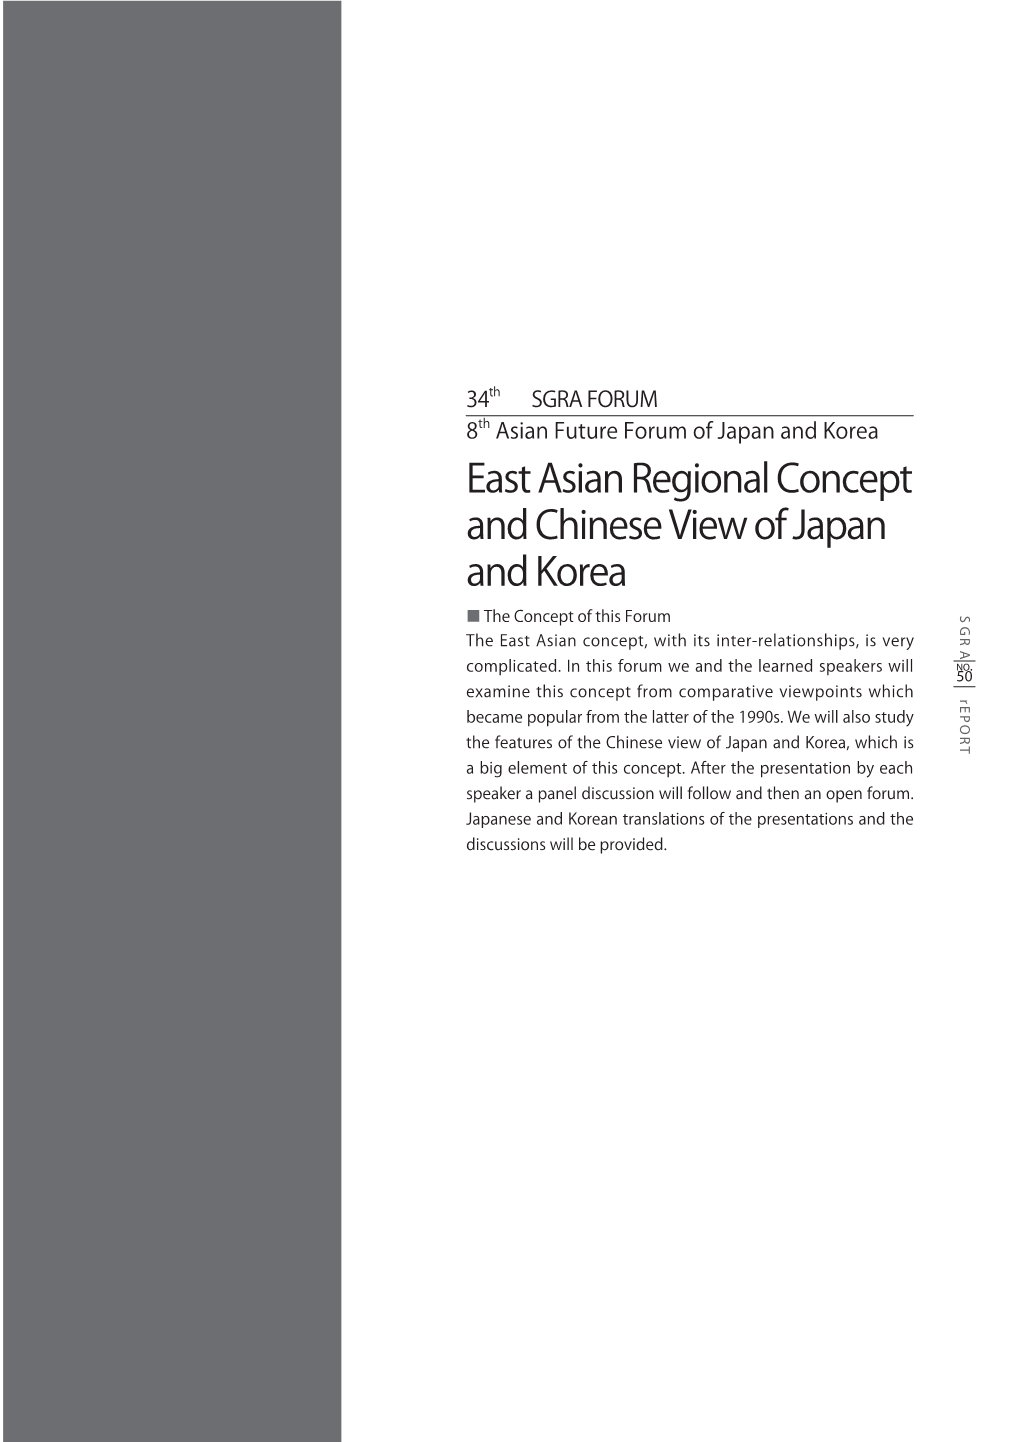 East Asian Regional Concept and Chinese View of Japan and Korea